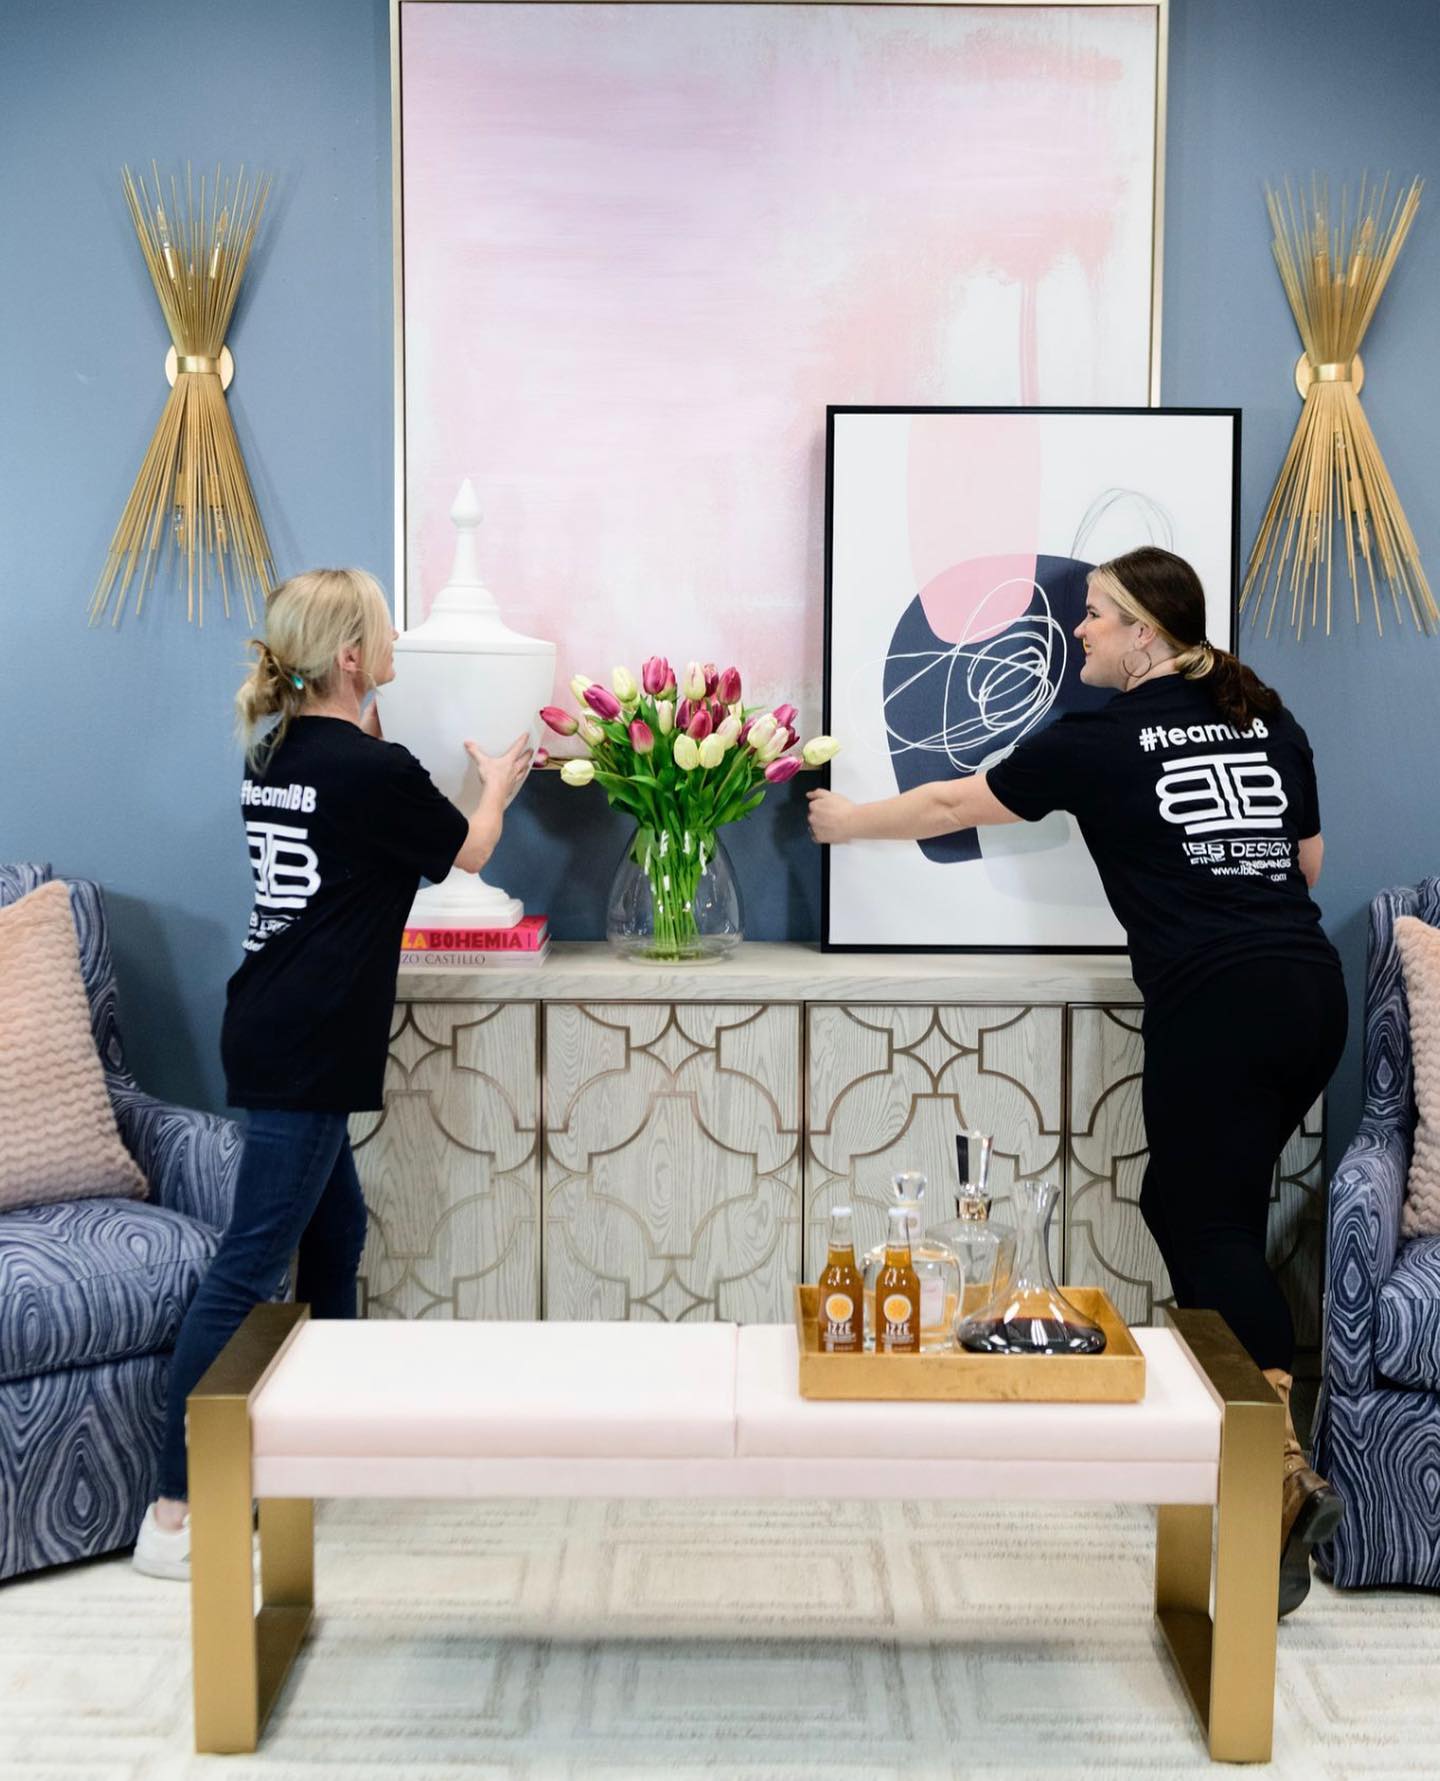 Our #visualmerchandising team is busy setting our floor with loads of new furnishings & accessories. Over 200 pieces arriving today! Come see what’s new at #ibbdesign & get #instantgratification for your #homedecor needs! #newarrivals #shophomedecor #Dallasdesign #getitnow #homefurnishings #furniturestore #homedecor #customfurniture #liveinstyle #happystartsathome #teamIBB